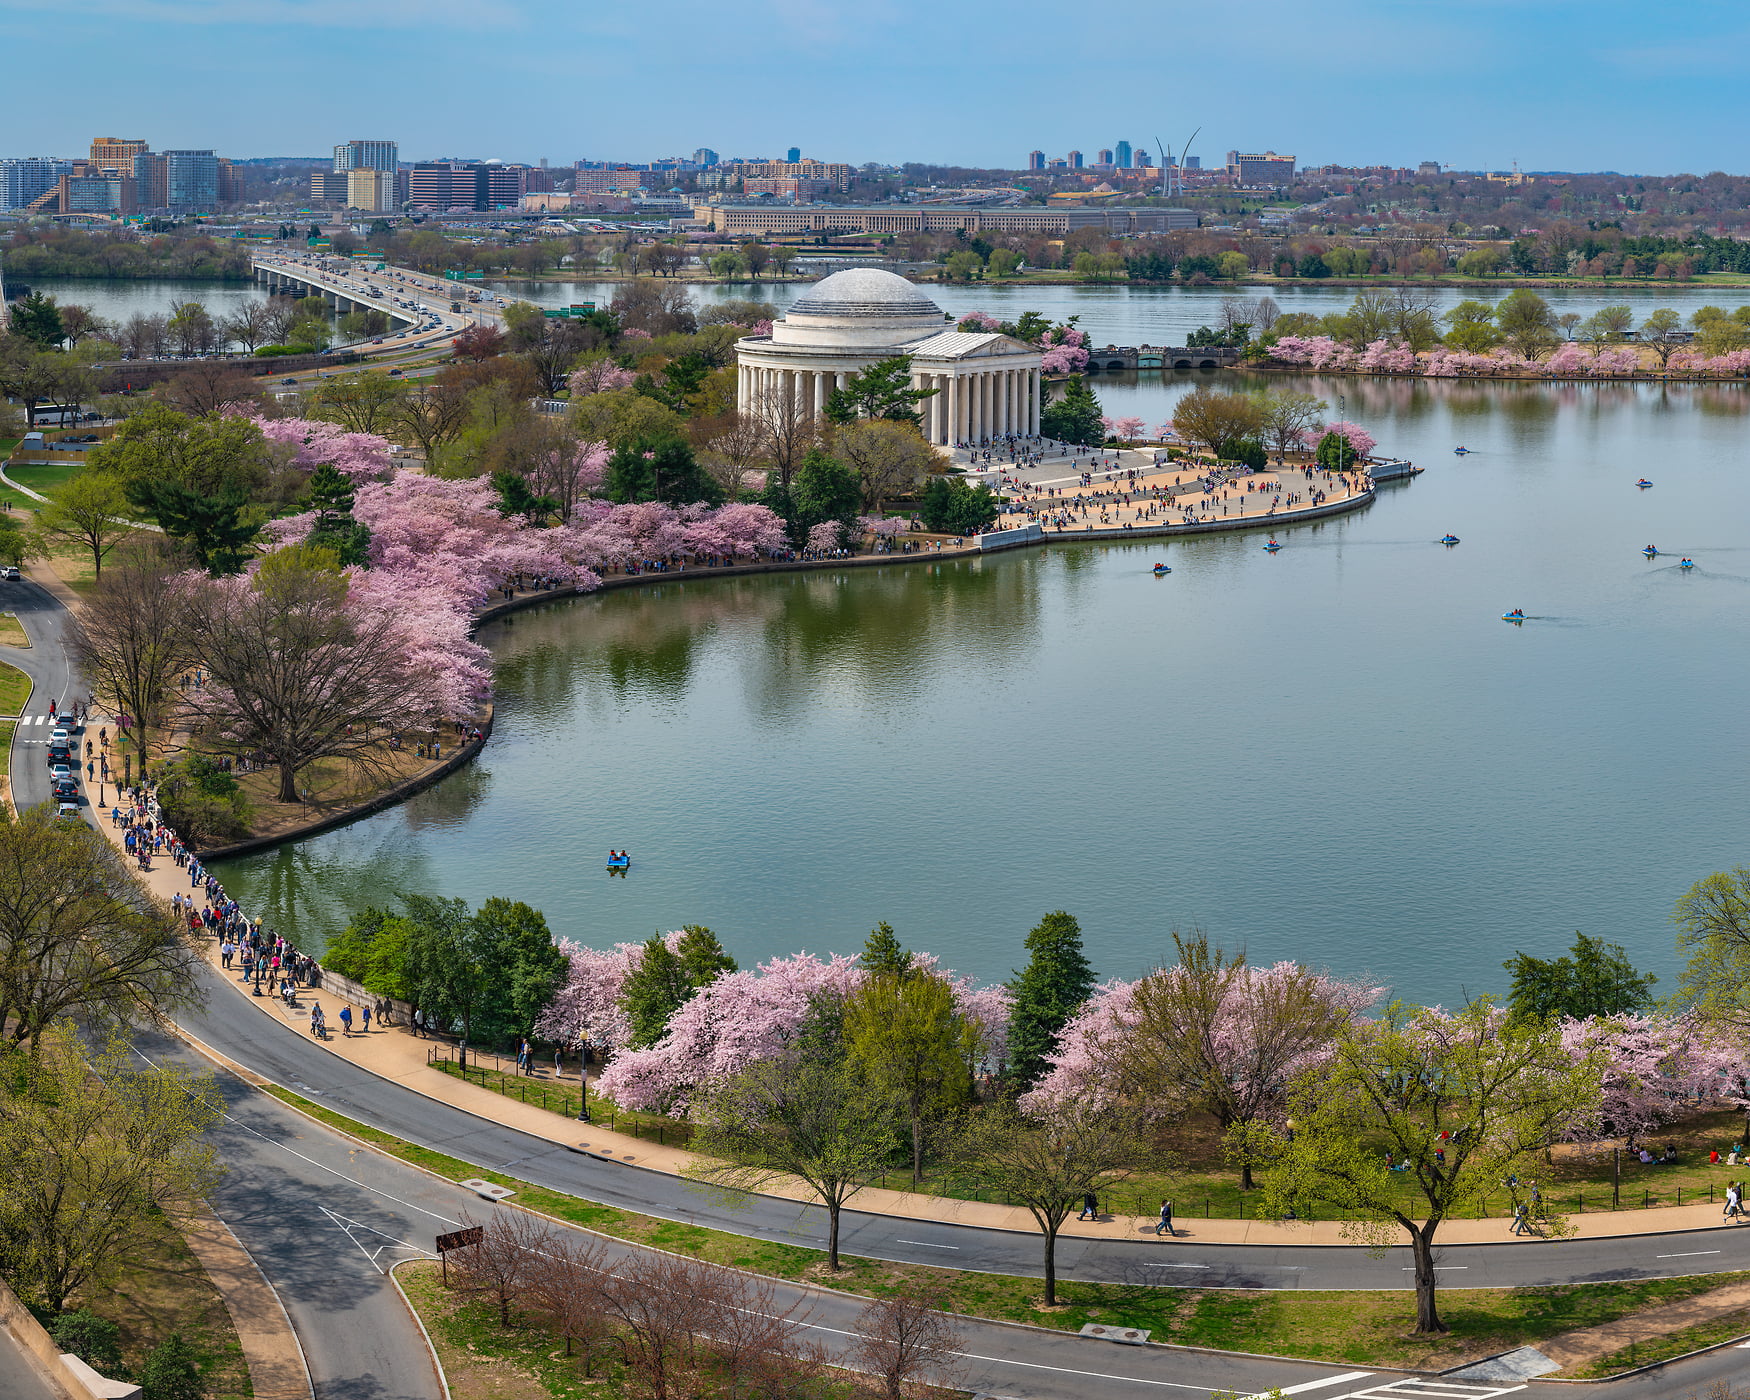 470 megapixels! A very high resolution, large-format VAST photo of the Cherry Blossom Festival, Jefferson Memorial, Tidal Basin, and cherry trees; fine art photograph created by Tim Lo Monaco in Washington, D.C.